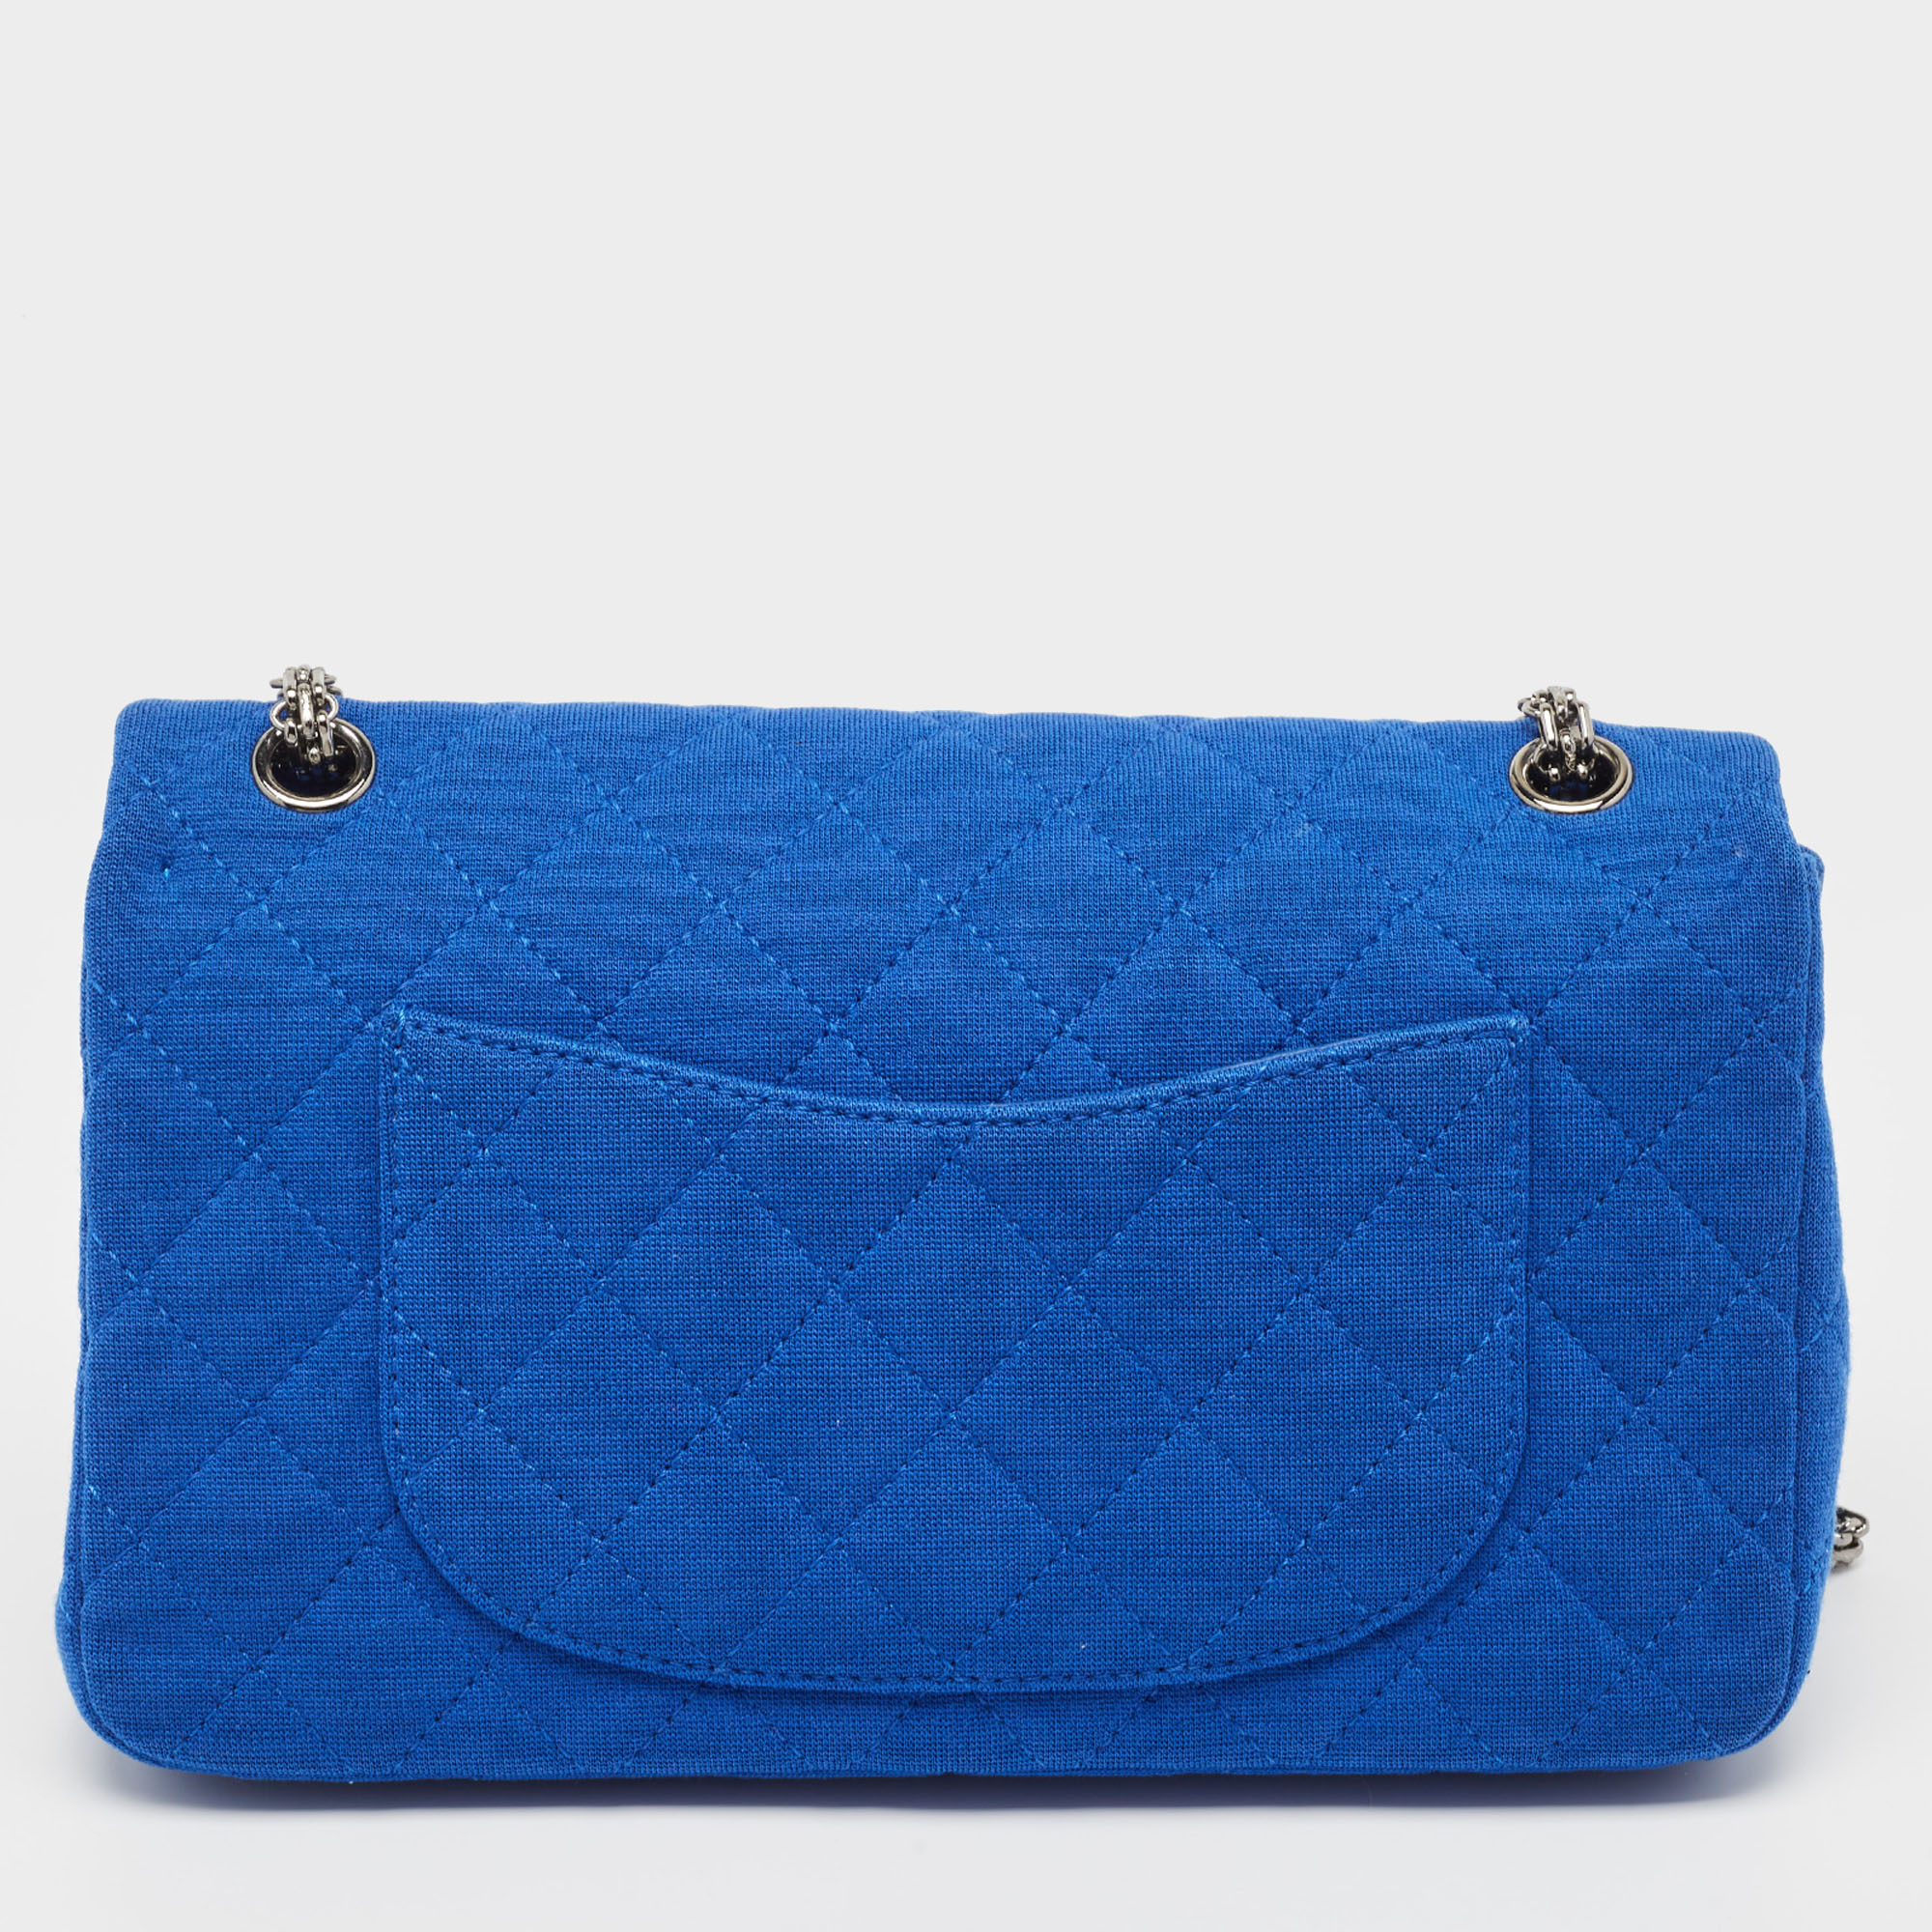 Chanel Blue Quilted Jersey 226 Reissue 2.55 Flap Bag